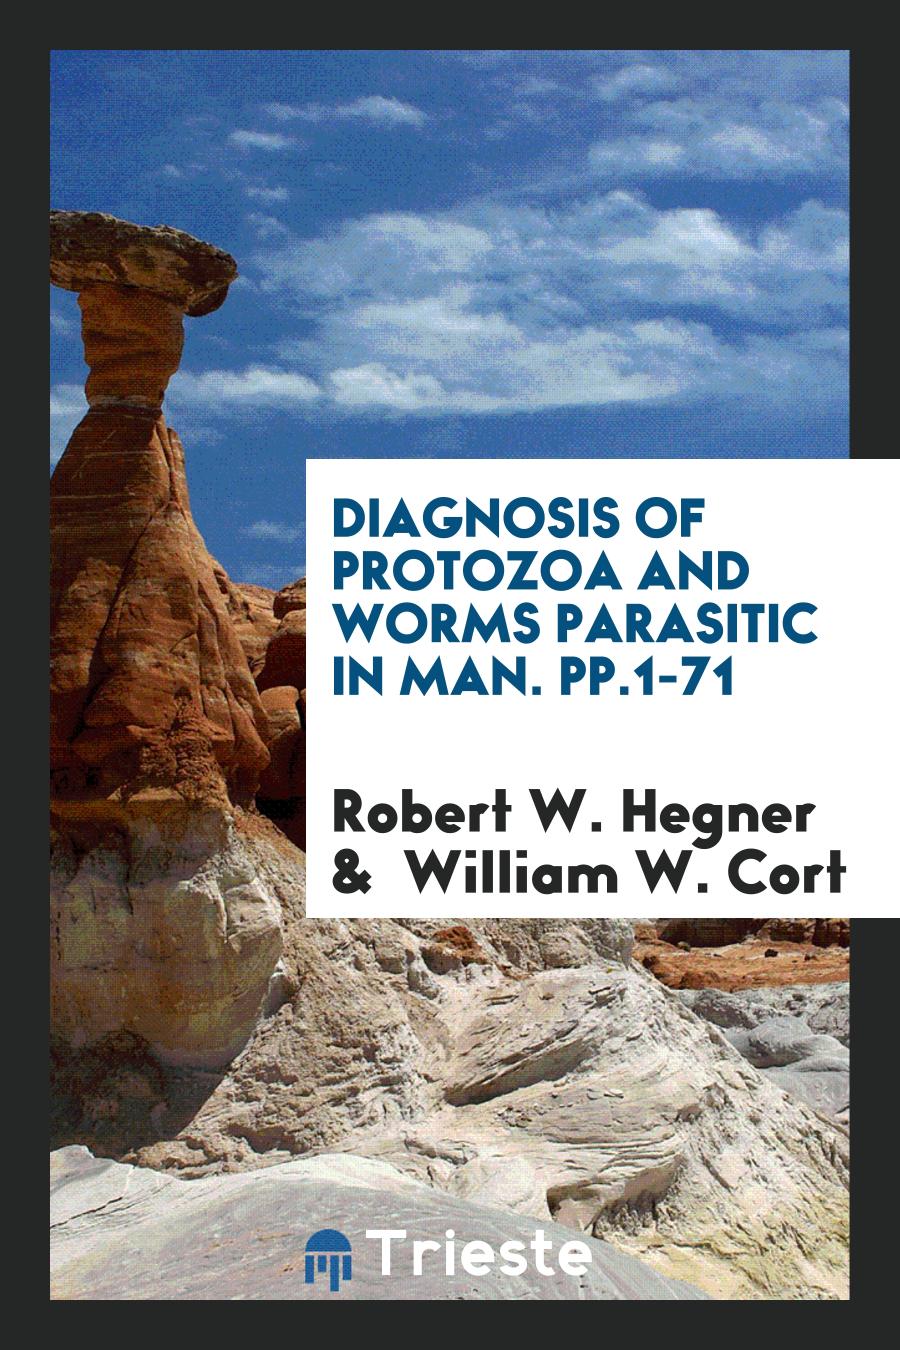 Diagnosis of Protozoa and Worms Parasitic in Man. pp.1-71